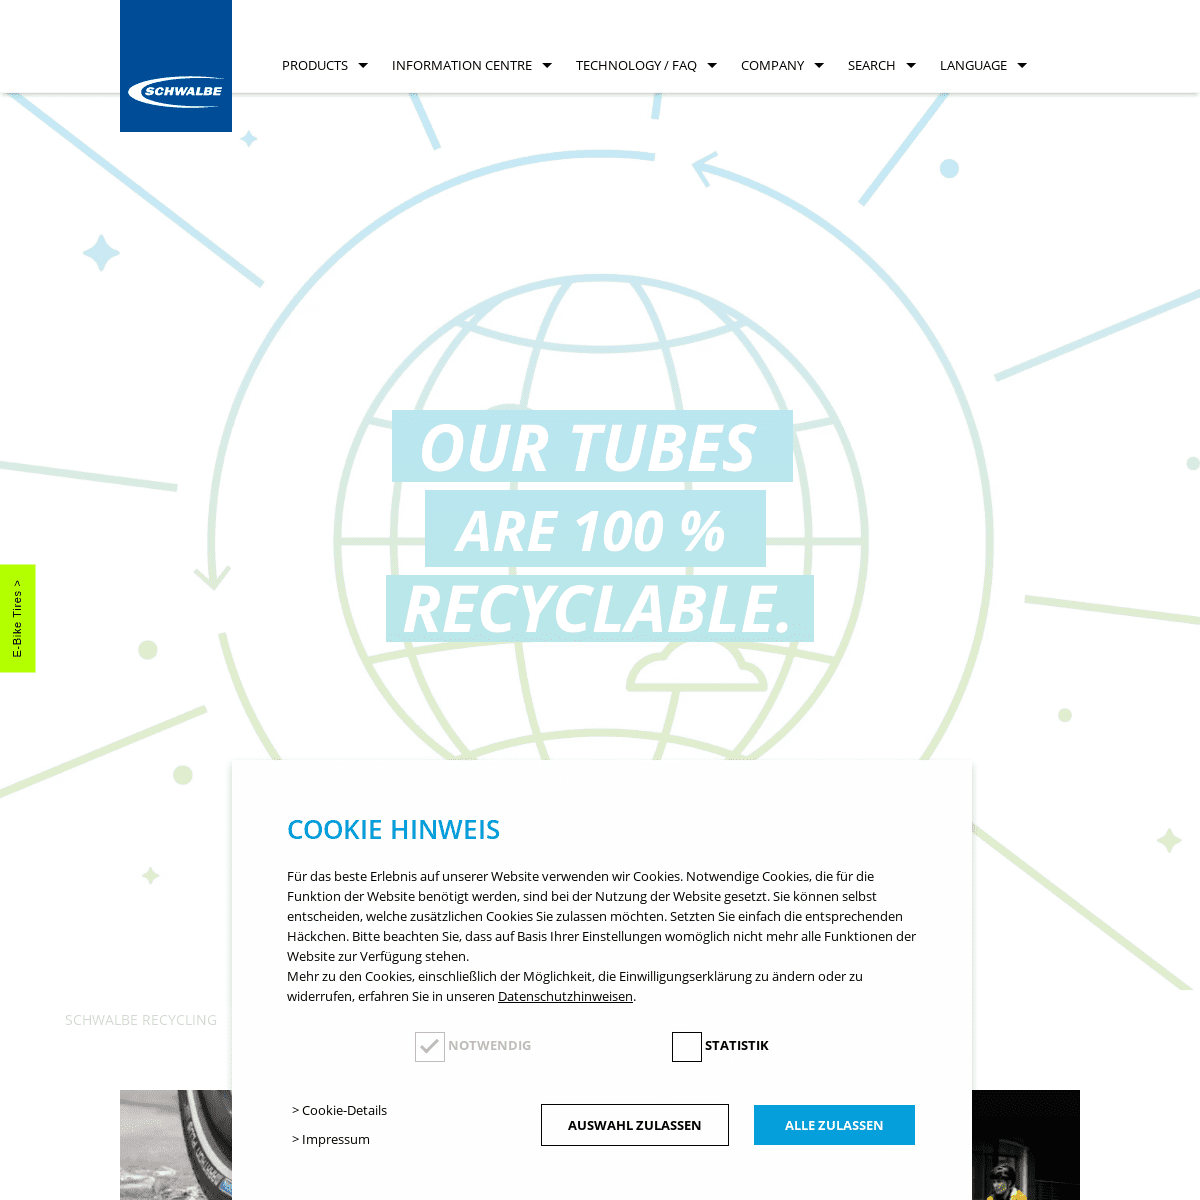 A complete backup of schwalbe.com